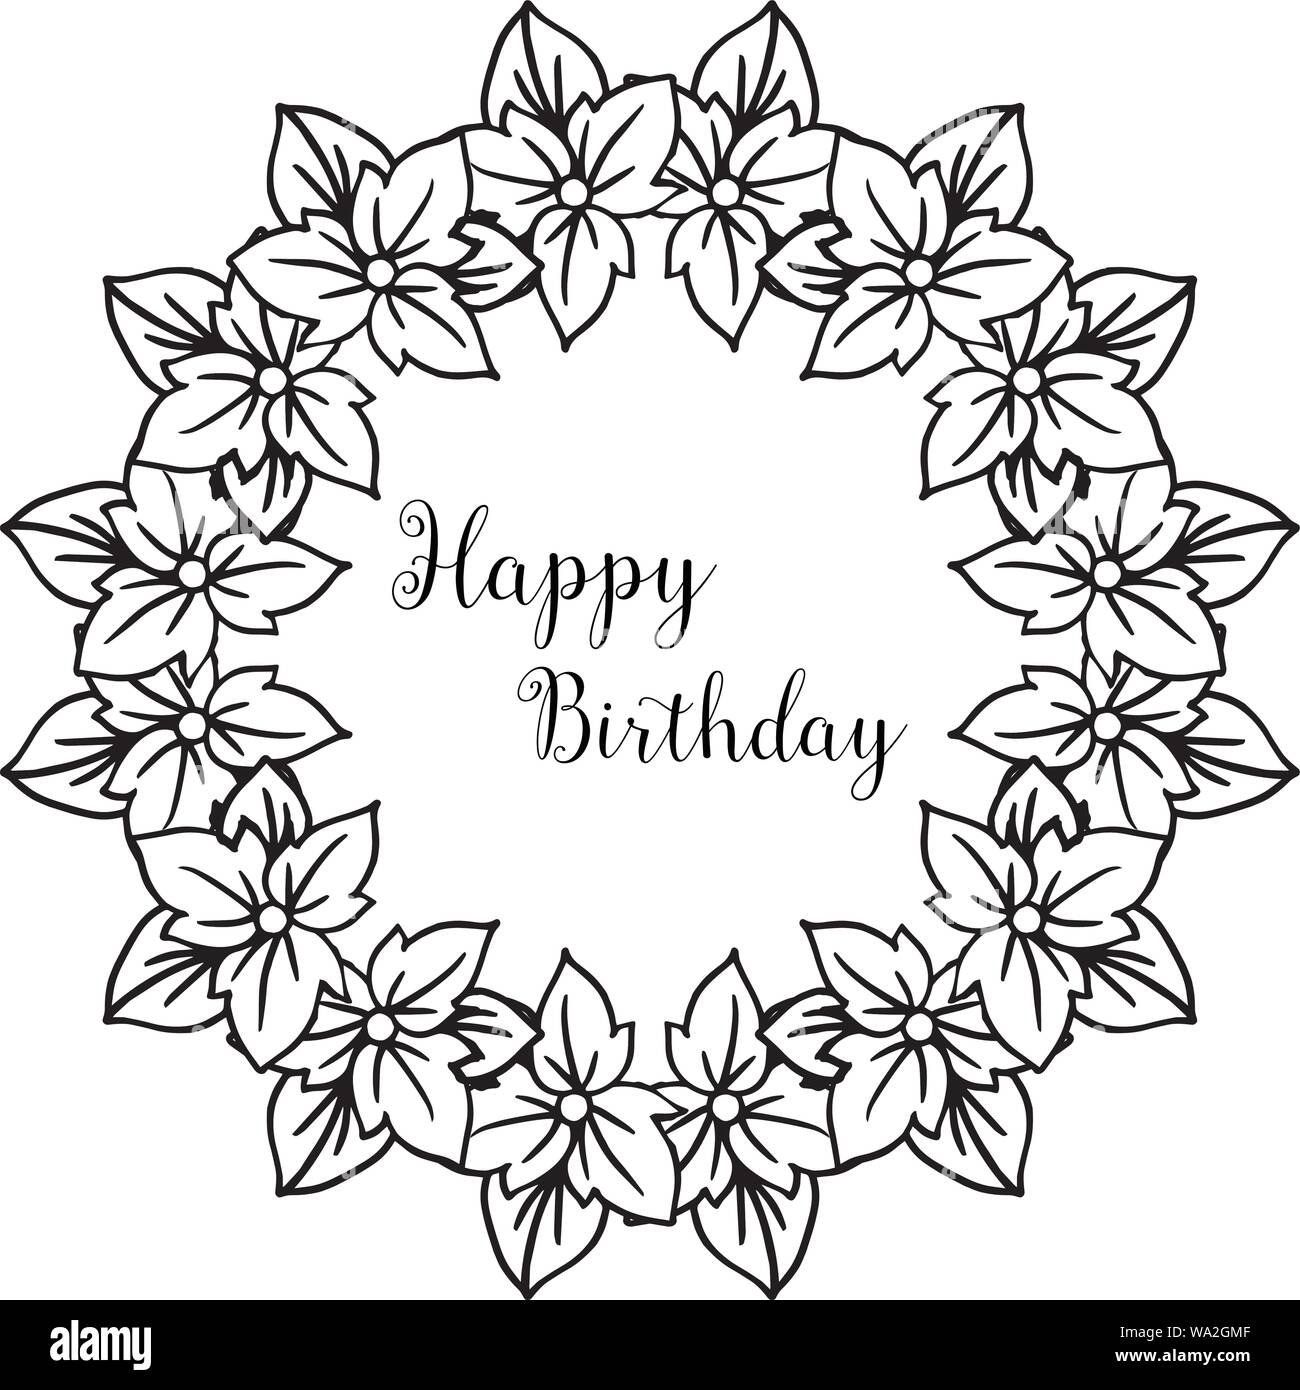 Greeting card happy birthday, with pattern flower frame, seamless ...